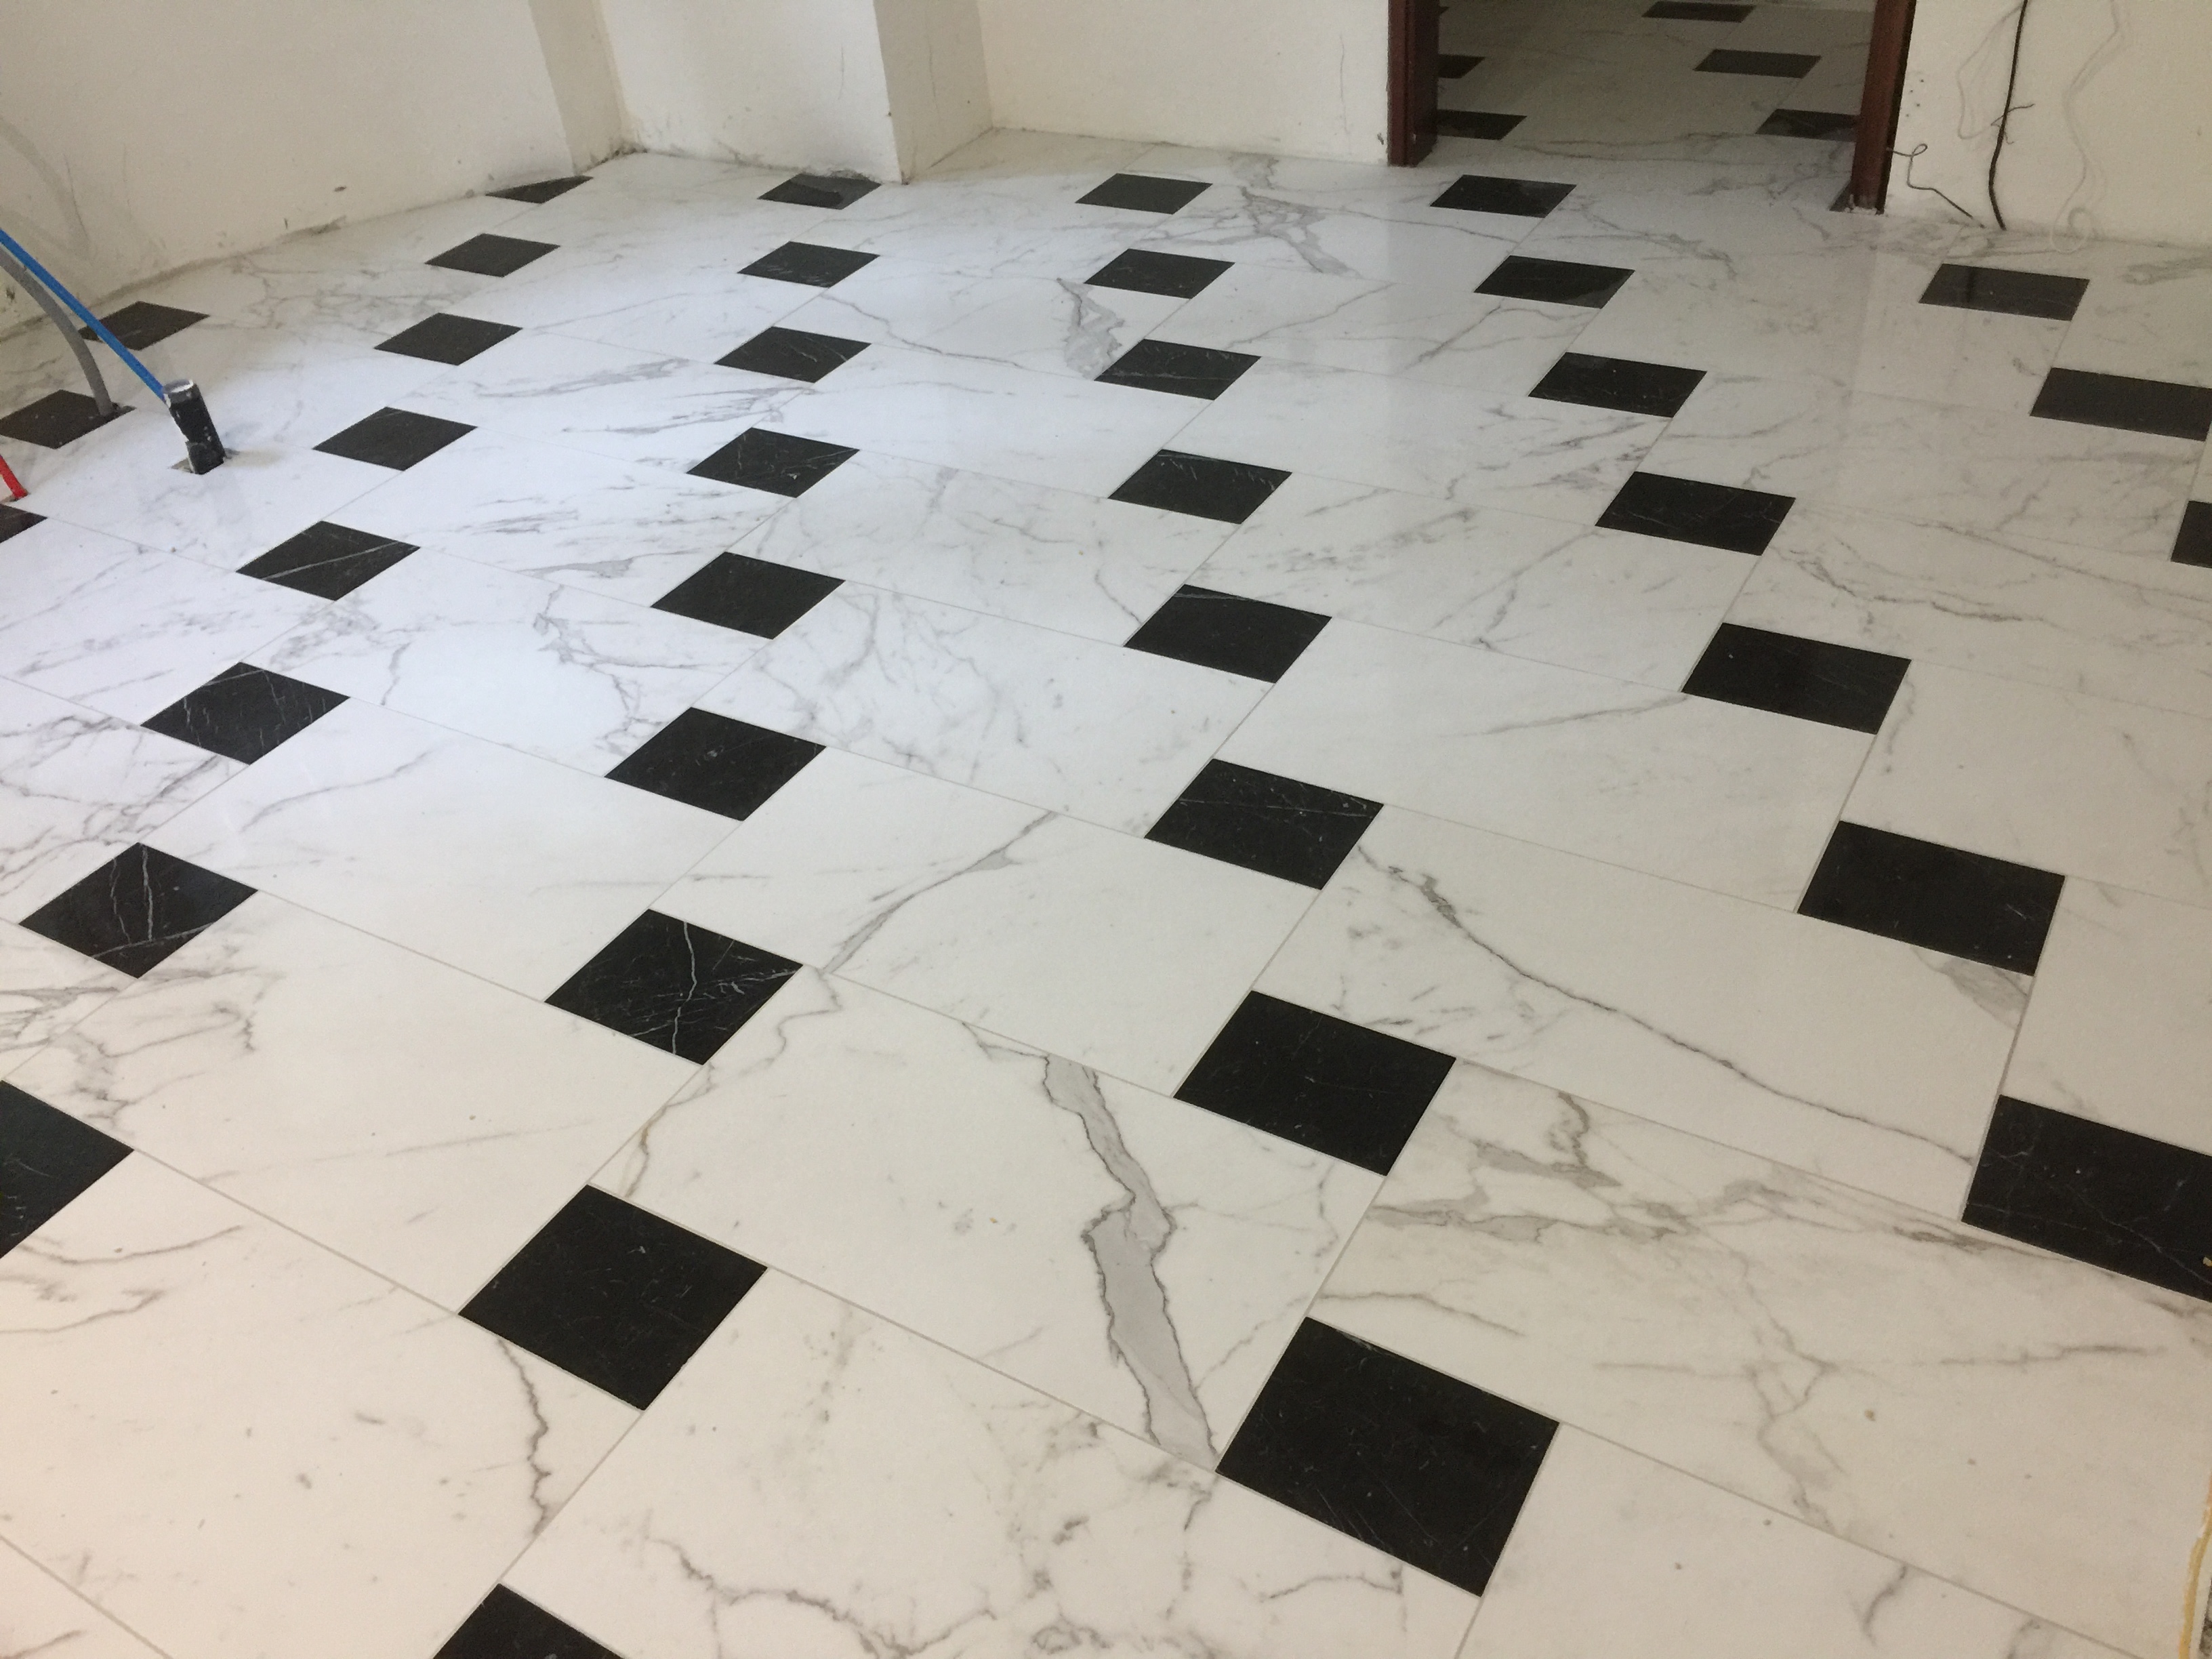 Call now for a tile contractor you can count on!